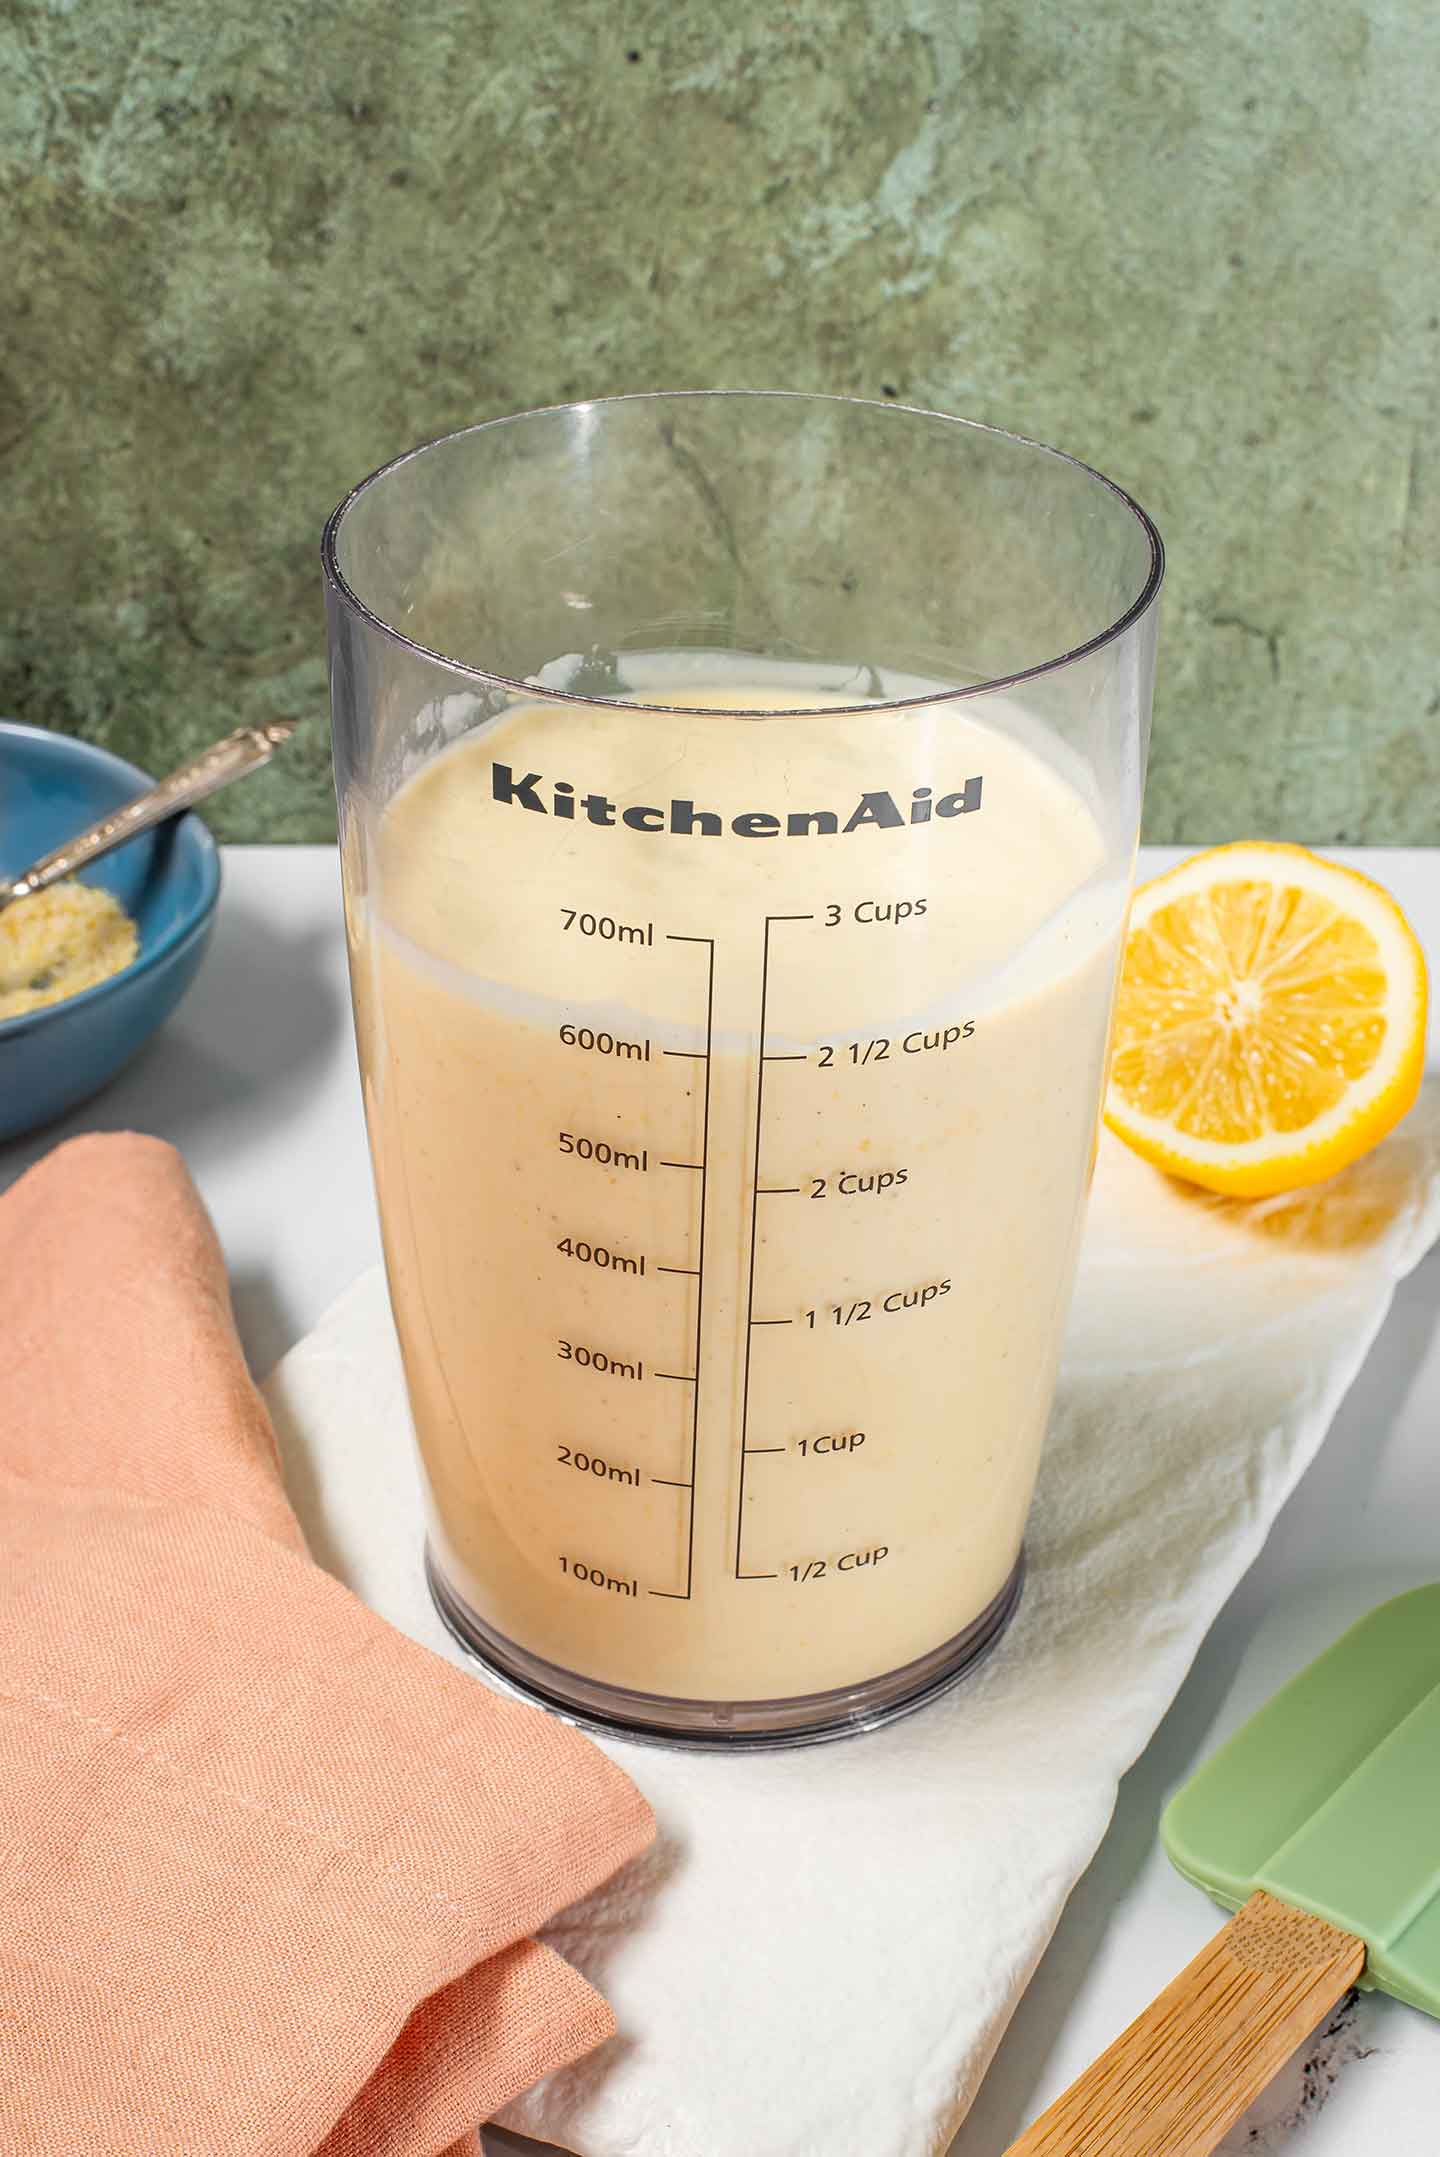 Blended dairy-free alfredo sauce fills a blending jar with measurements indicating that the sauce is 600ml or 2 ½ cups.